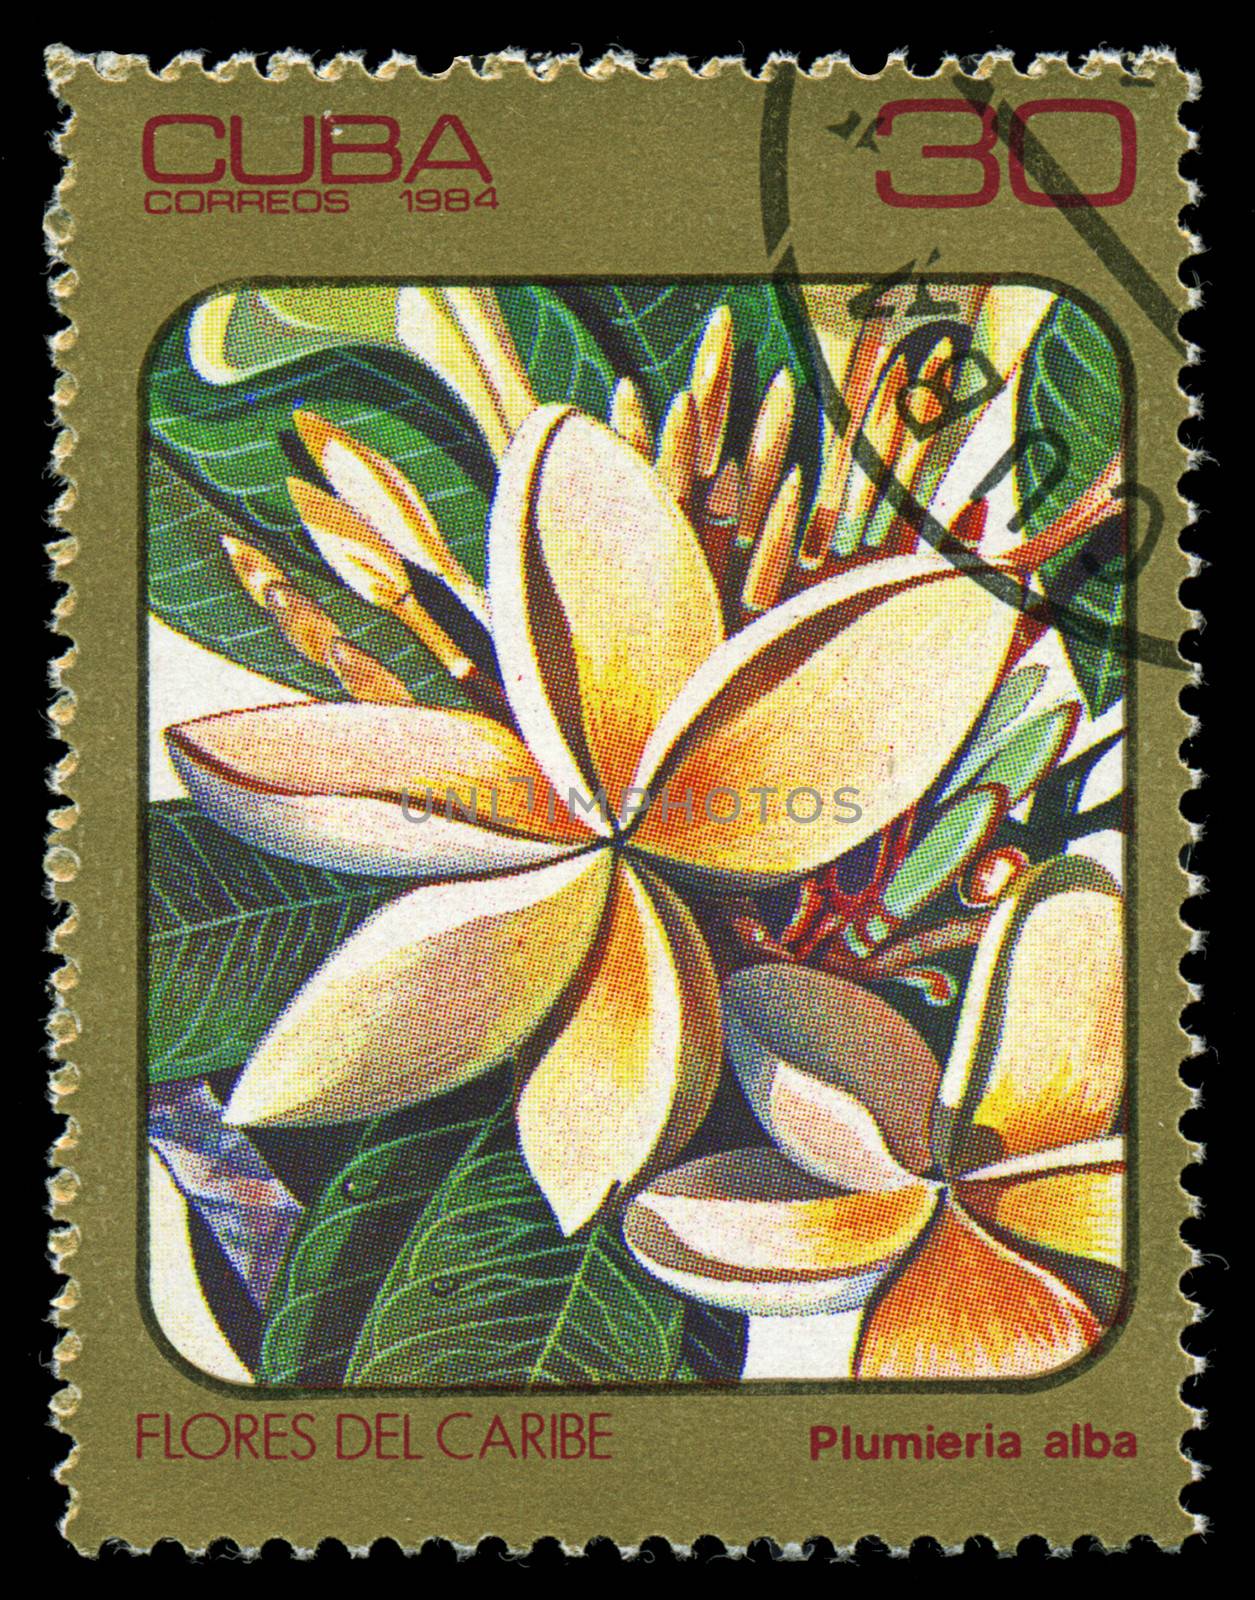 CUBA - CIRCA 1984: post stamp printed in Cuba shows image of plumeria alba (plumieria) from Caribbean flowers series, Scott catalog 2691 A730 30c, circa 1984 by Zhukow